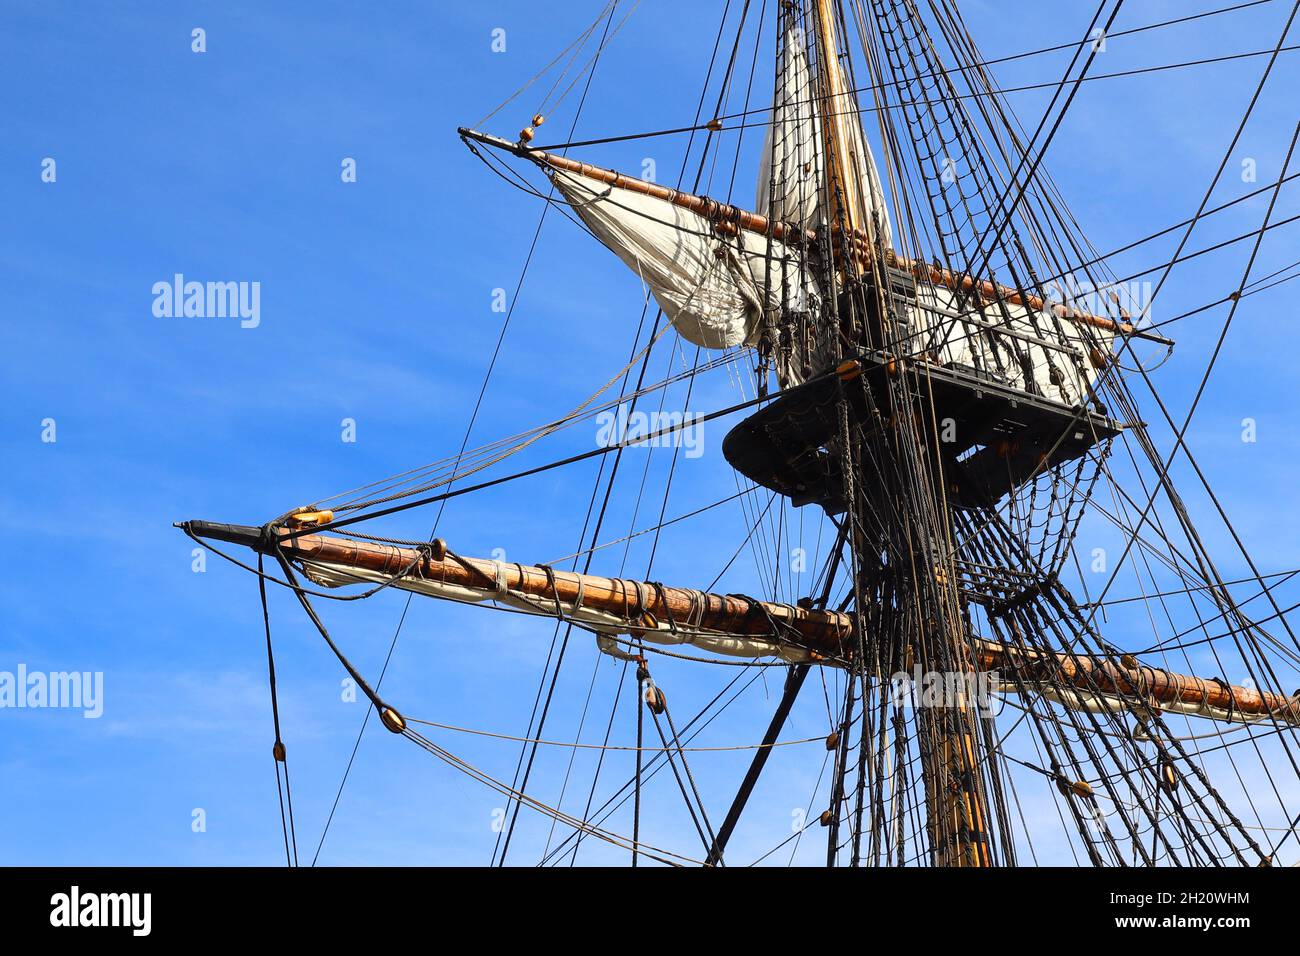 Close-up of a mast with lowered sails on a full-rigged sailing ship. Stock Photo